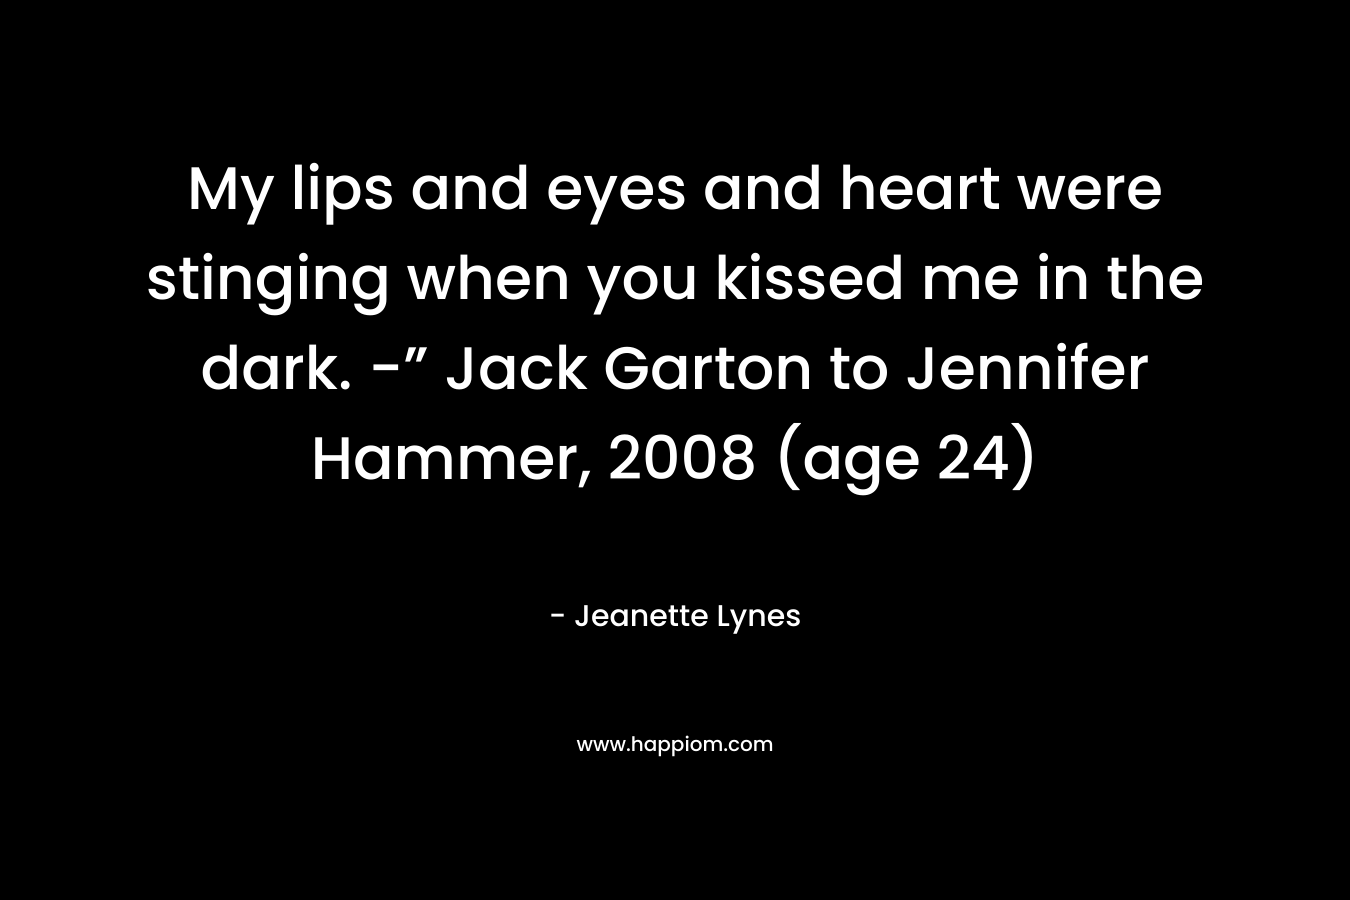 My lips and eyes and heart were stinging when you kissed me in the dark. -” Jack Garton to Jennifer Hammer, 2008 (age 24) – Jeanette Lynes